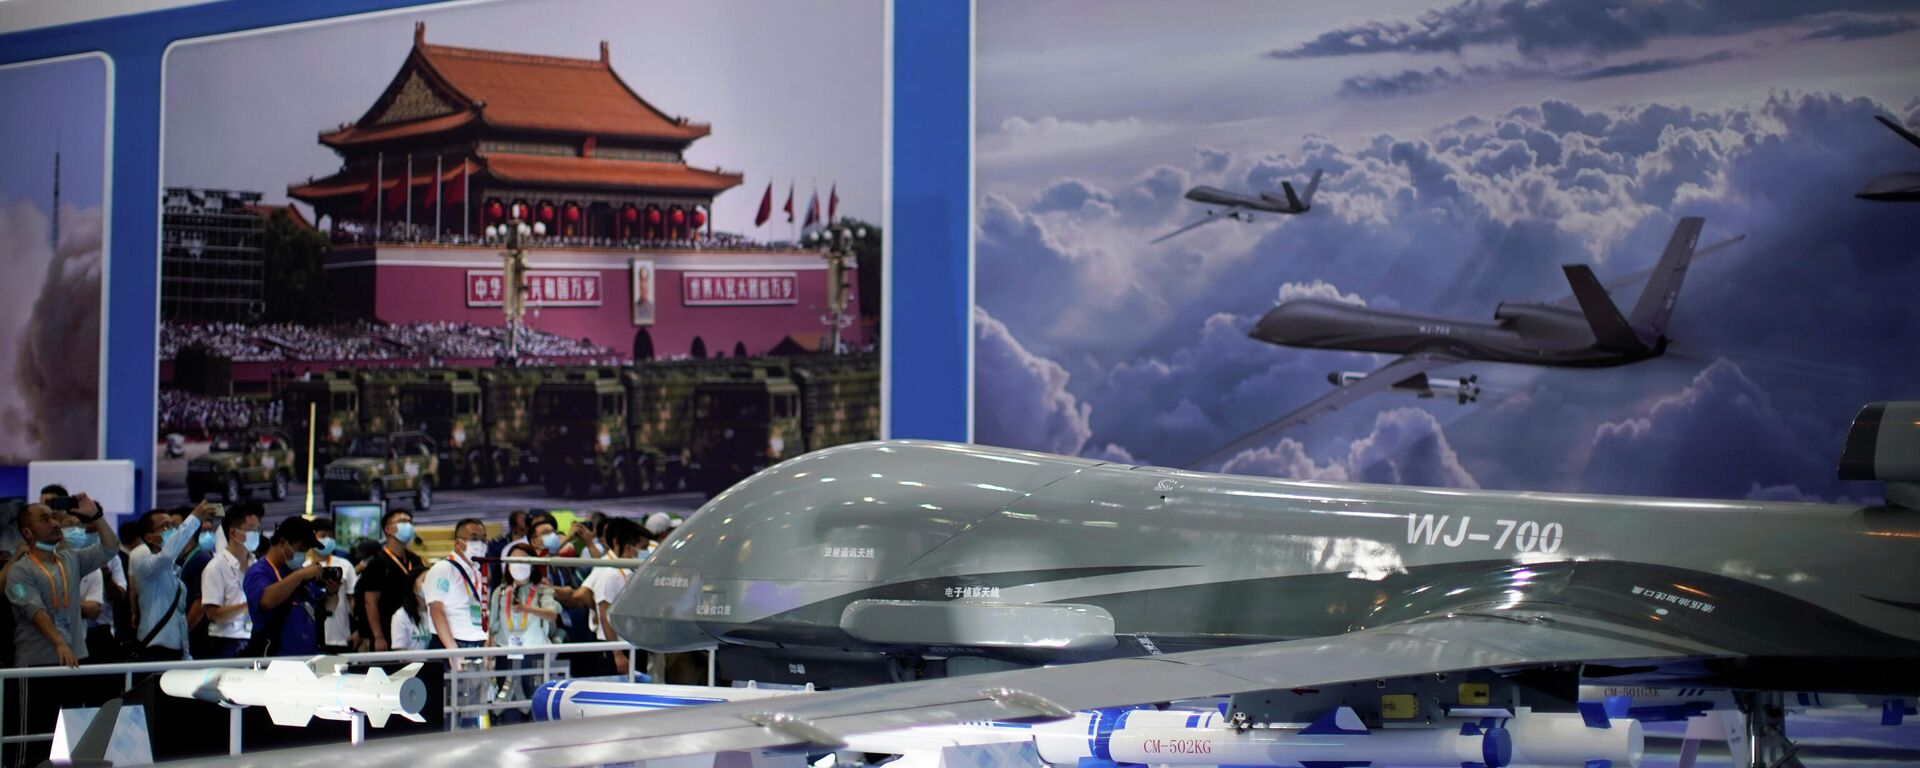 Visitors stand near a model of WJ-700 armed reconnaissance drone displayed at the China International Aviation and Aerospace Exhibition, or Airshow China, in Zhuhai, Guangdong province, China September 28, 2021 - Sputnik International, 1920, 14.10.2021